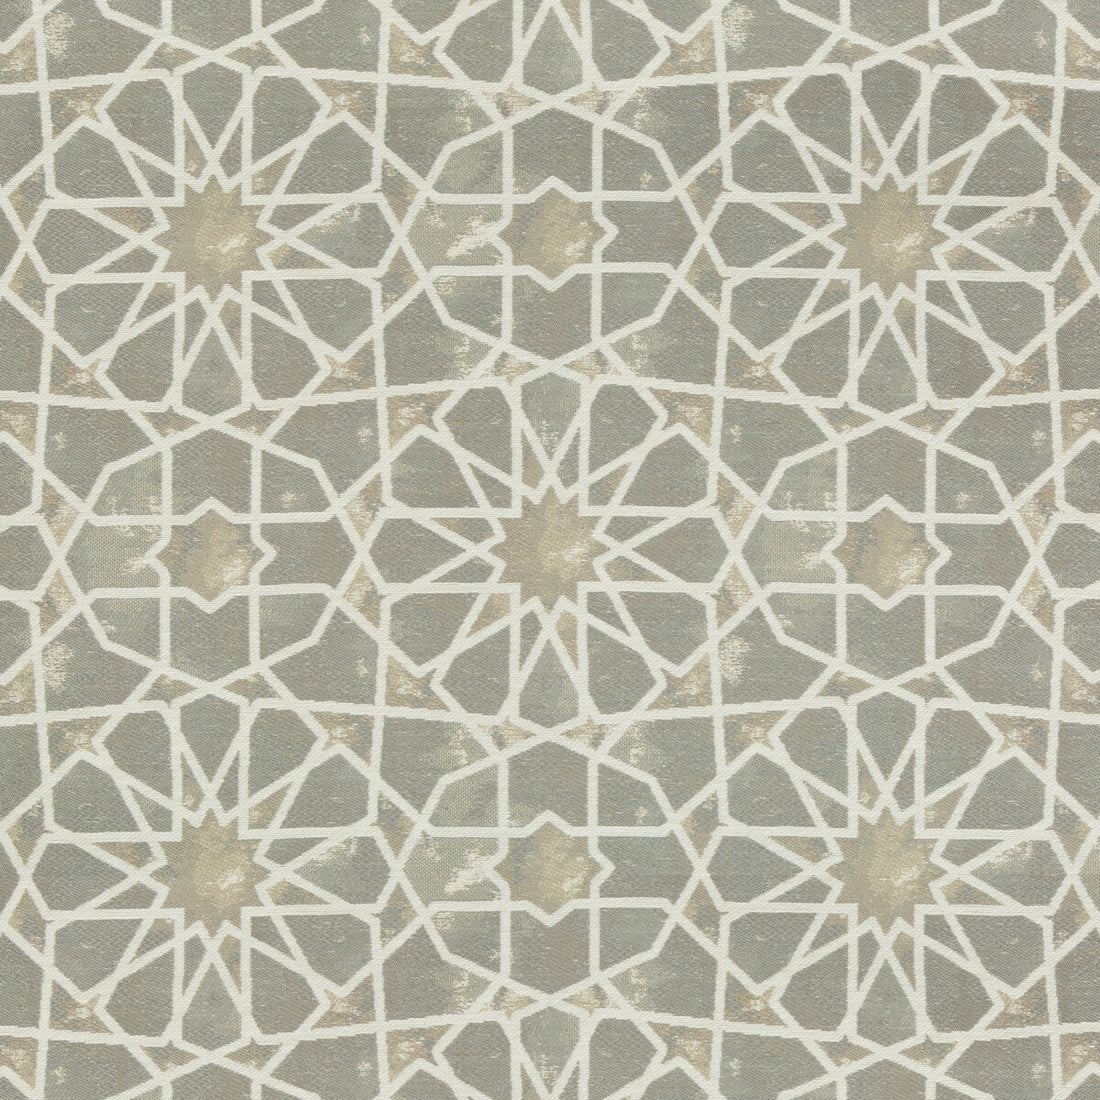 Kravet Contract fabric in 35101-11 color - pattern 35101.11.0 - by Kravet Contract in the Incase Crypton Gis collection